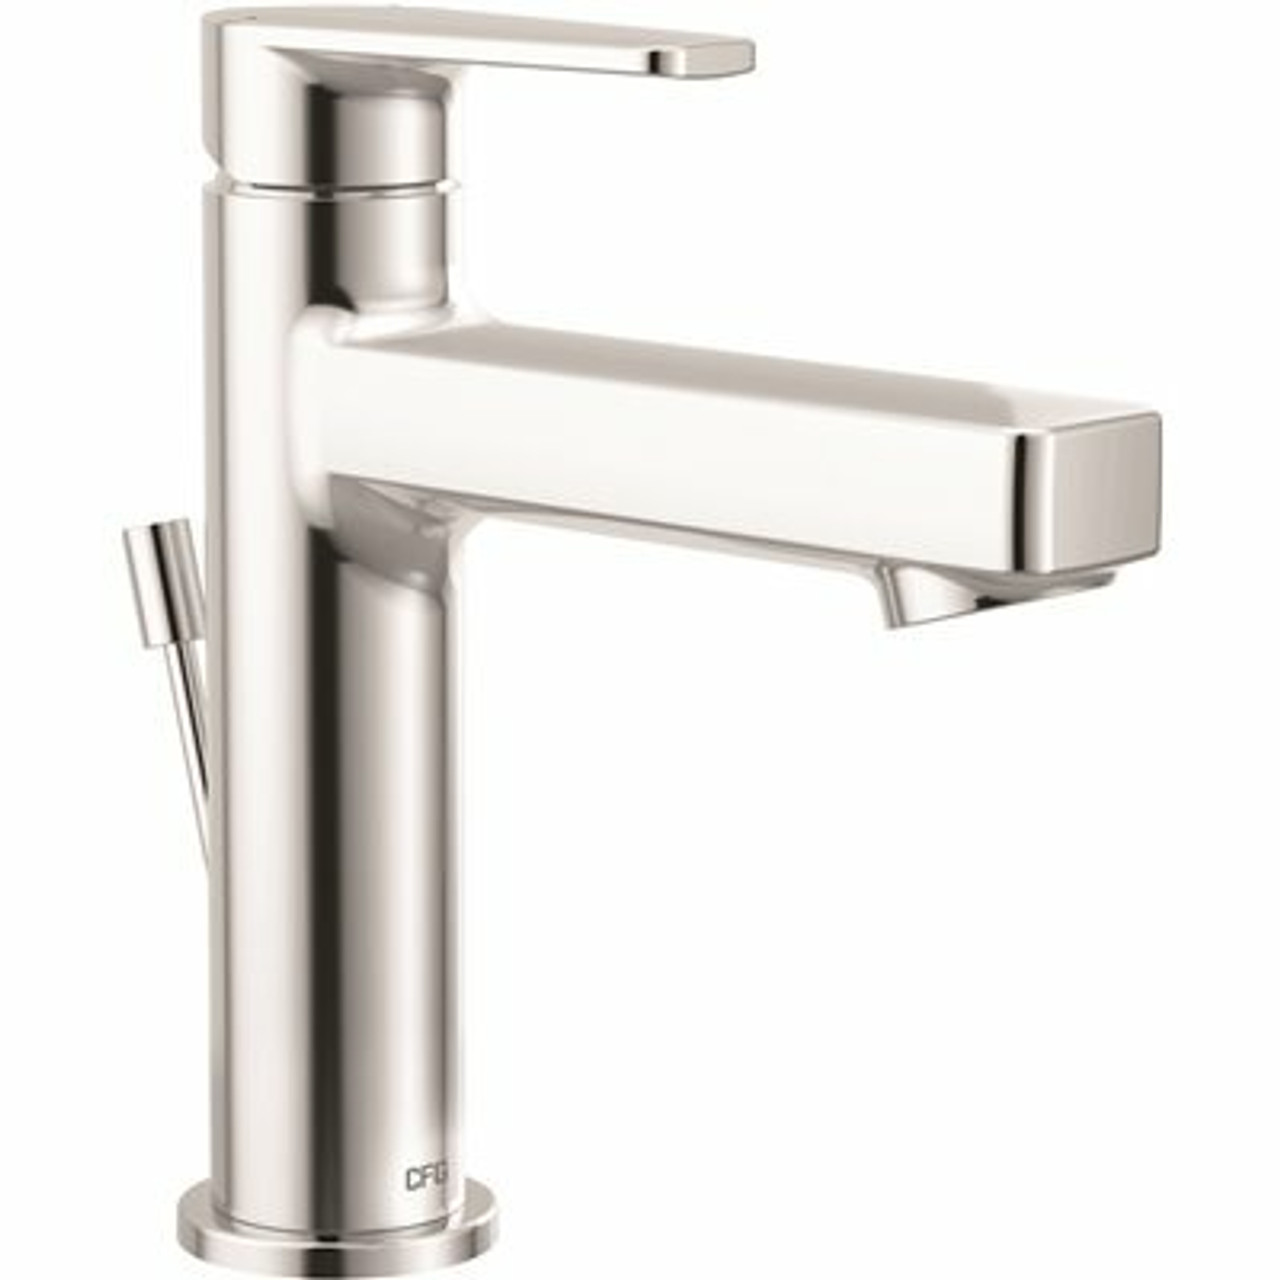 Cleveland Faucet Group Slate Single Hole Single-Handle Bathroom Faucet With Metal Drain Assembly In Chrome